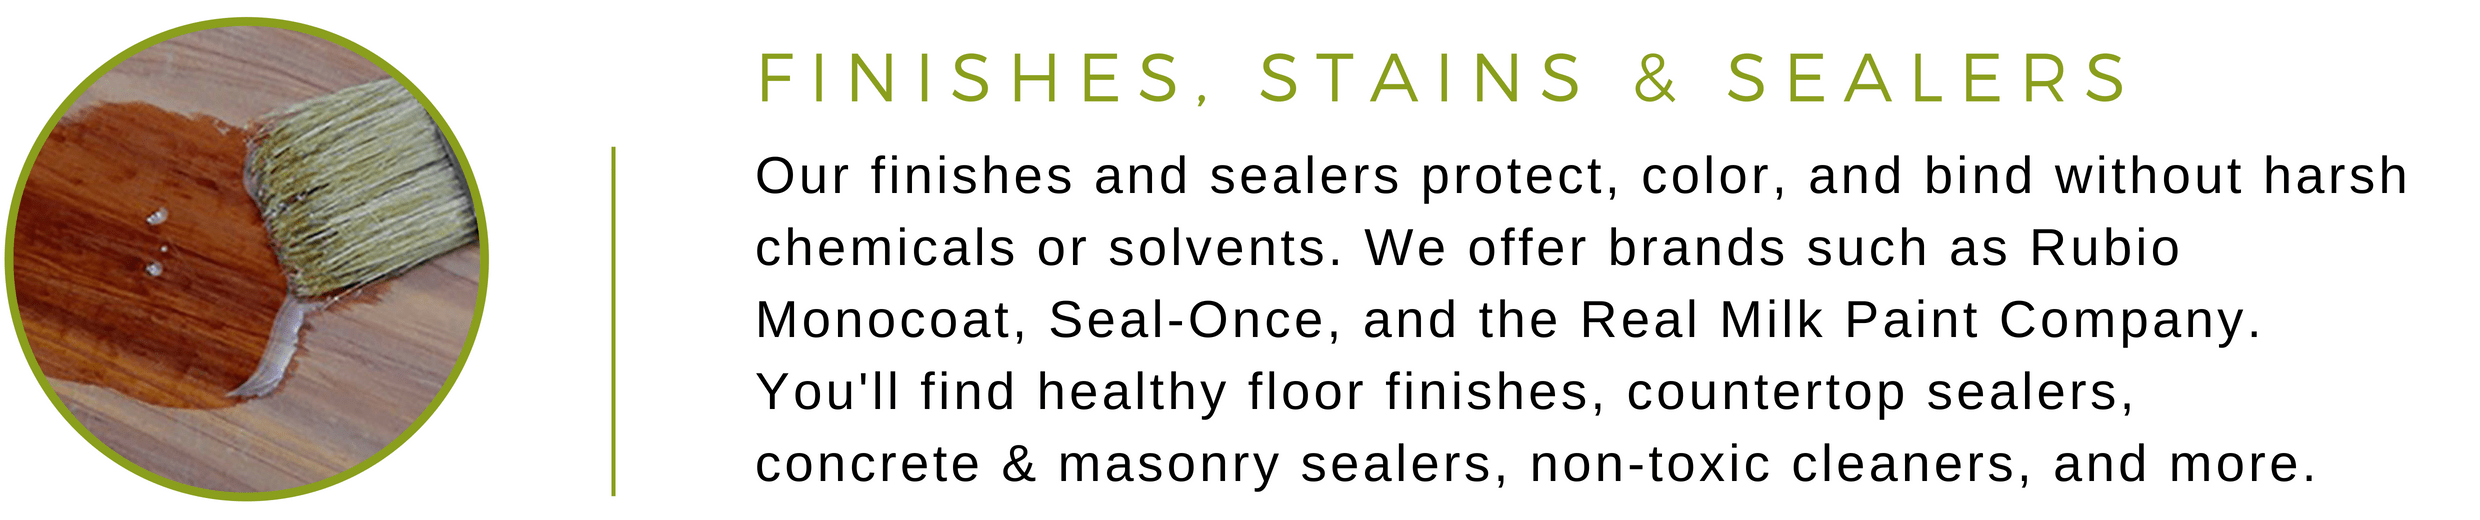 Our finishes and sealers protect, color, and bind without harsh chemicals or solvents. We offer brands such as Rubio Monocoat, Seal-Once, and the Real Milk Paint Company. You'll find healthy floor finishes, countertop sealers,  concrete & masonry sealers, non-toxic cleaners, and more